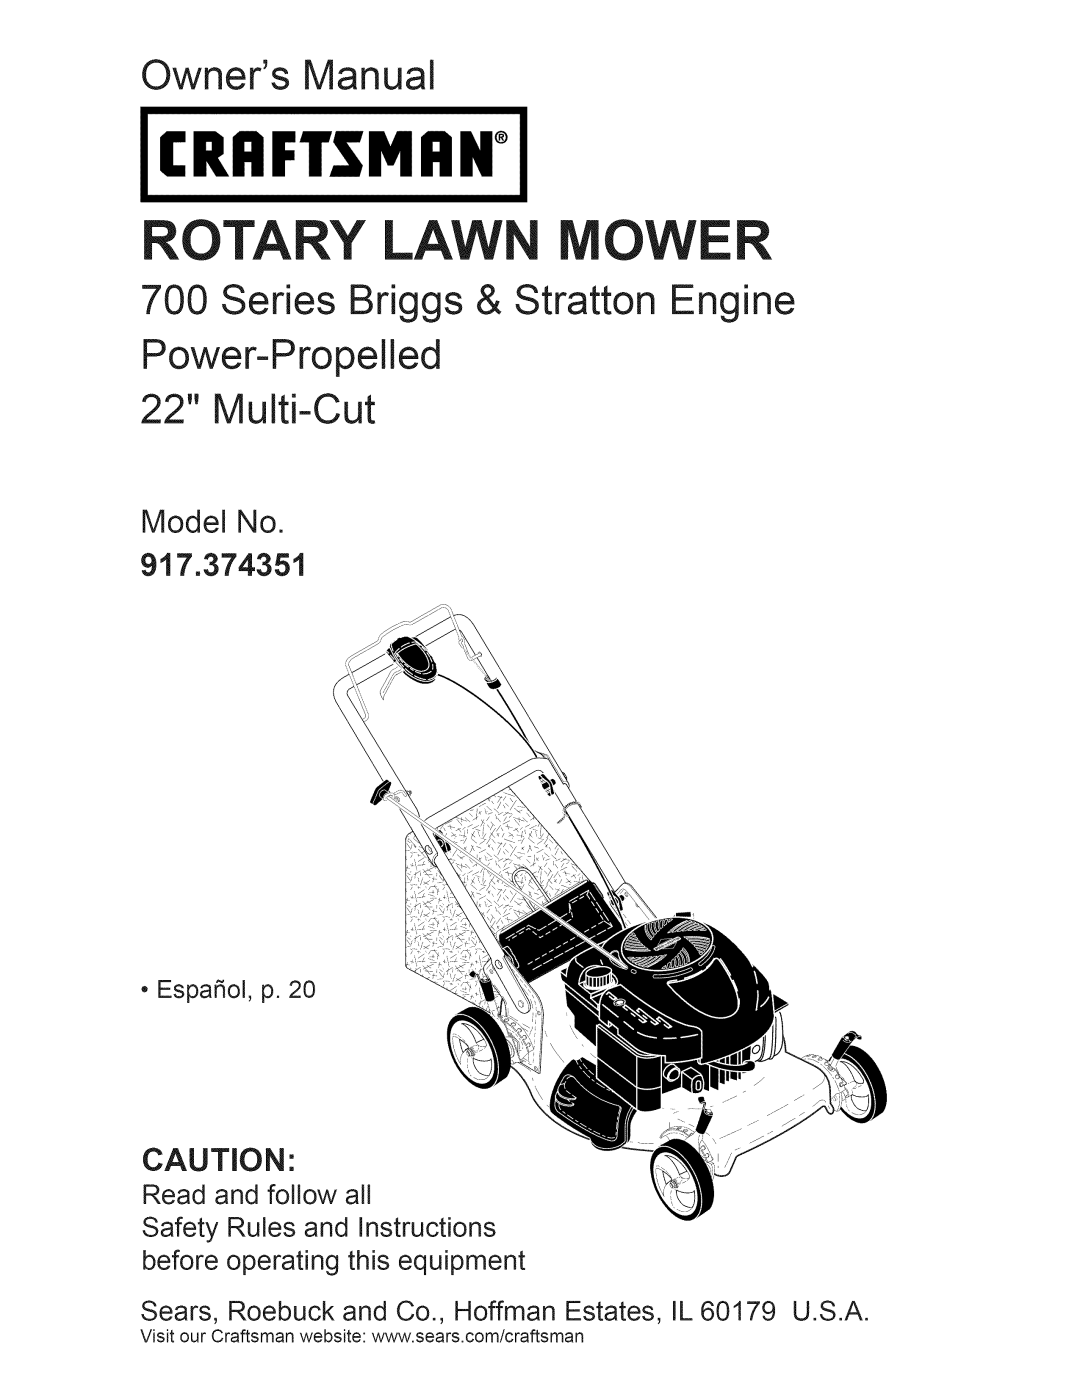 Craftsman manual Model No 917.374351, Craftsman, Rotary Lawn Mower, Owners Manual, Series Briggs & Stratton Engine 